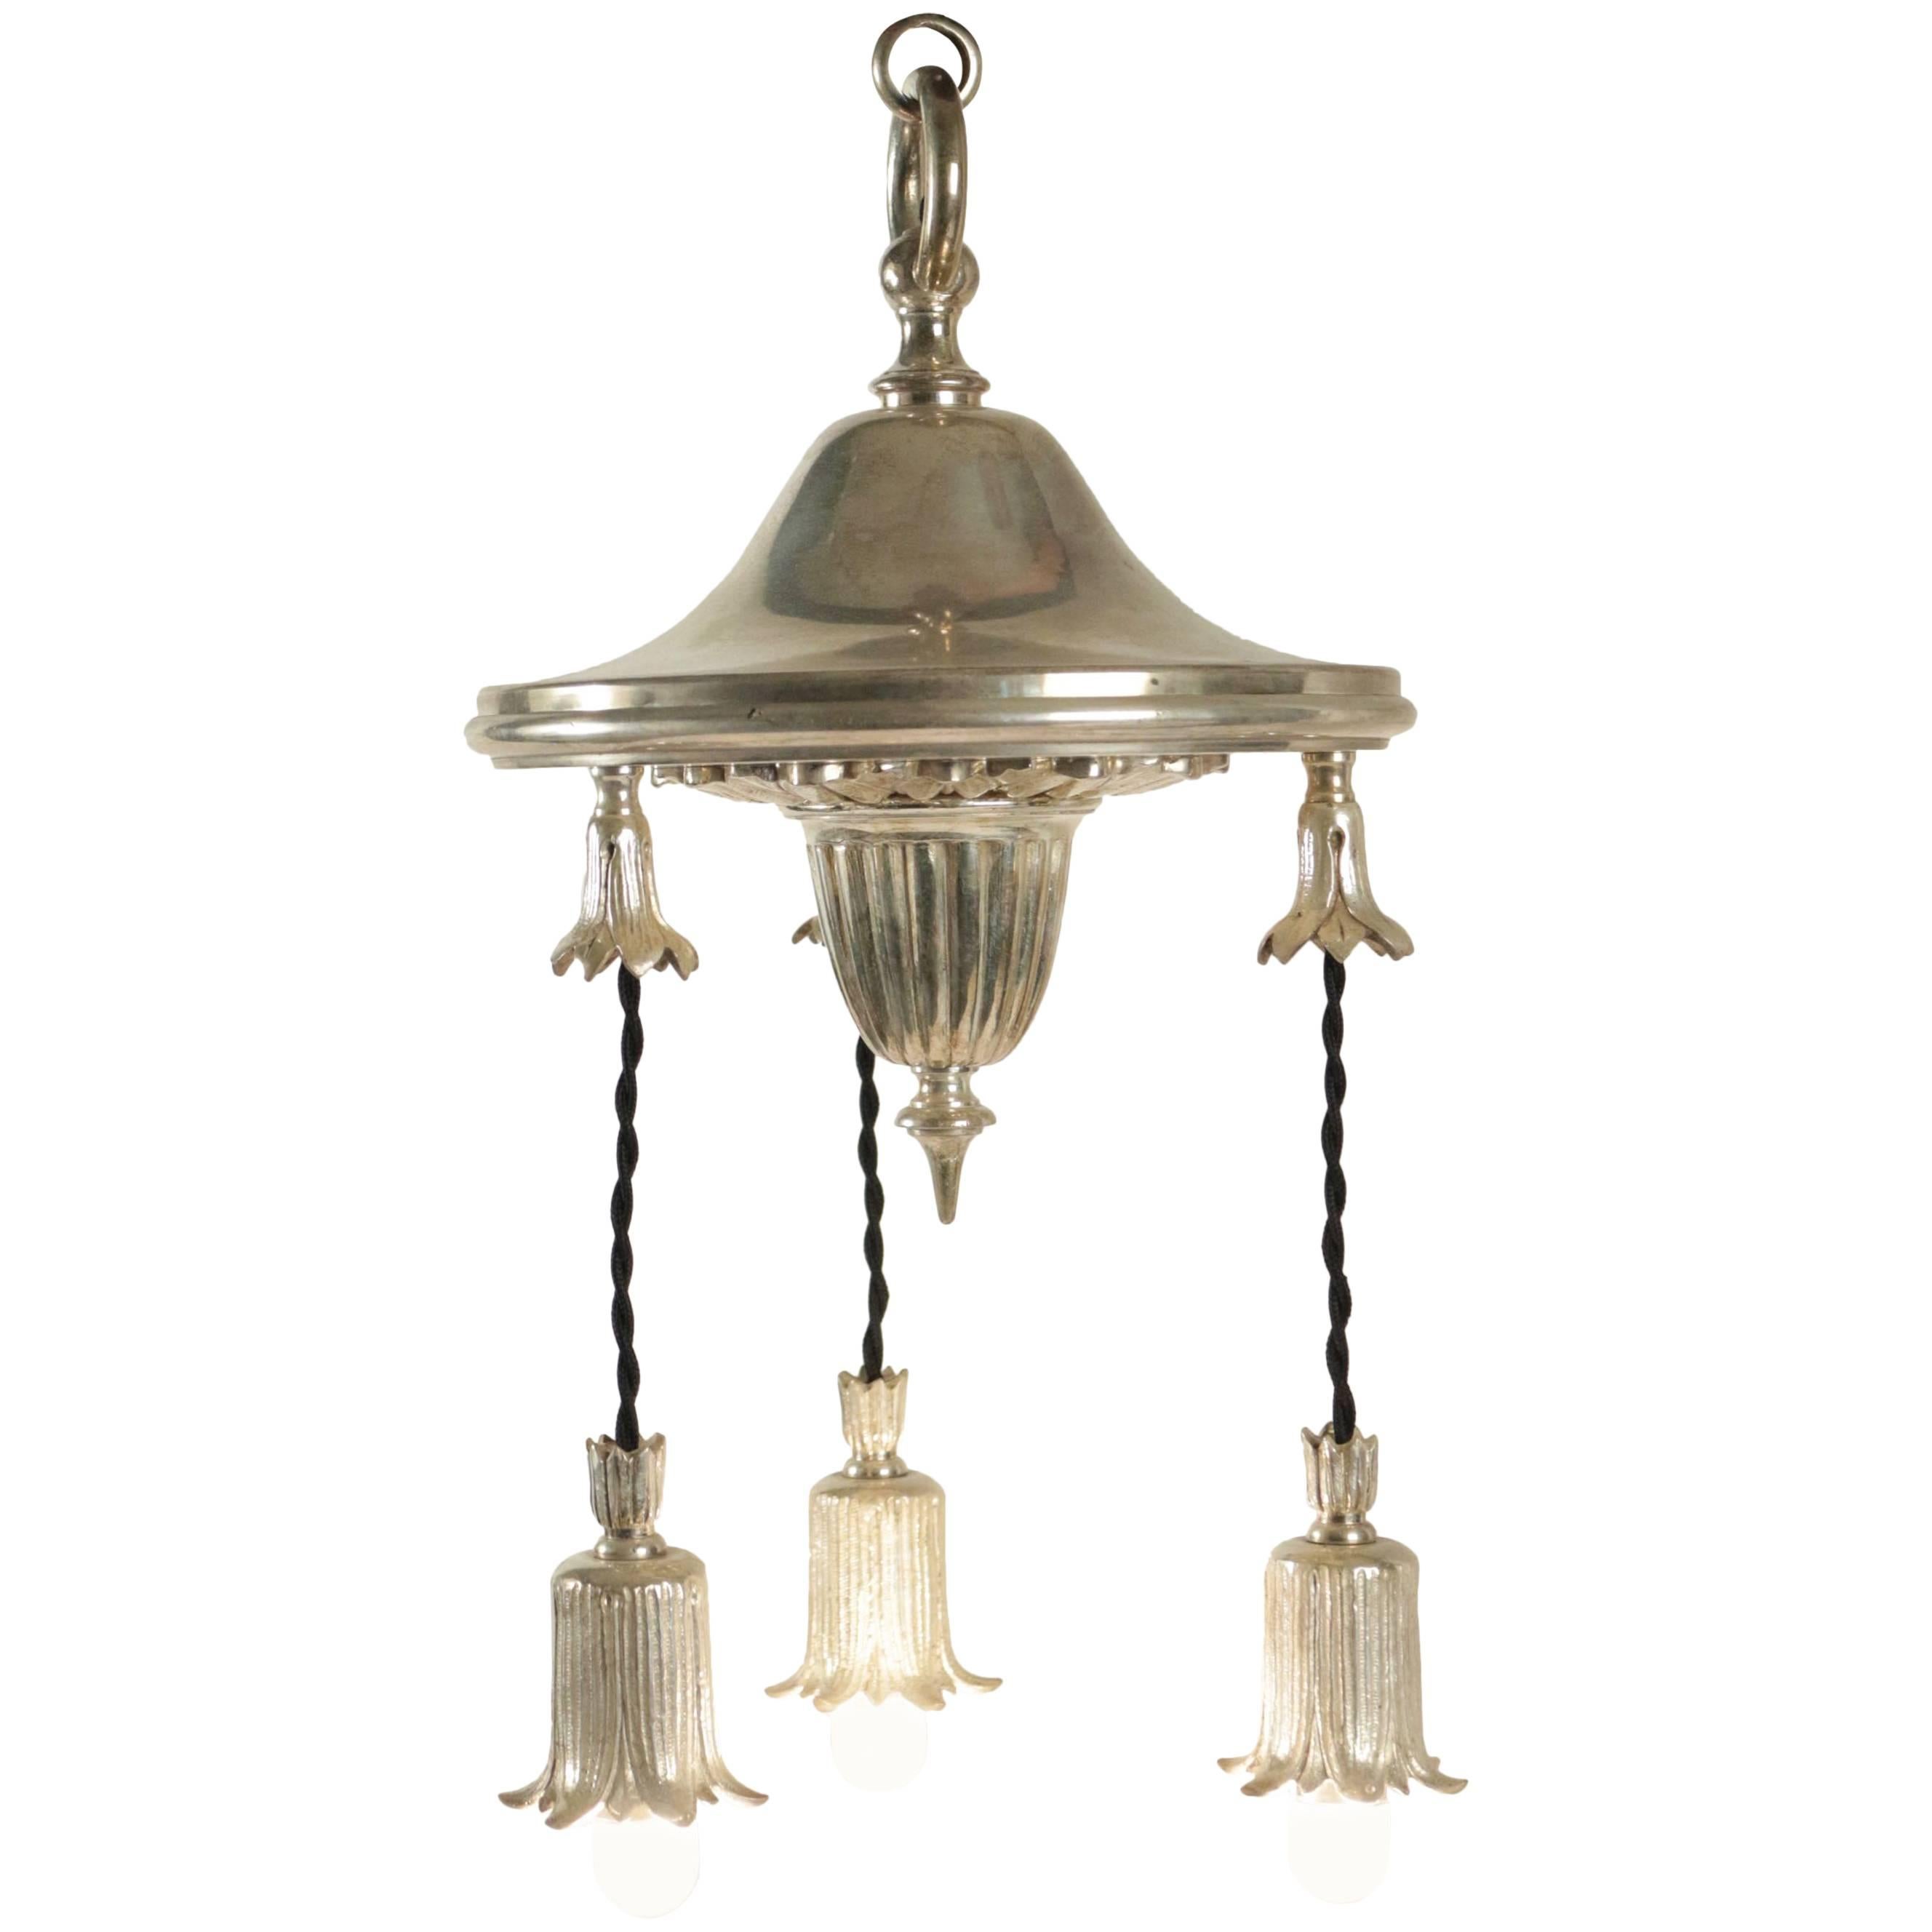 Very Pretty French Light Fixture in Silver Plate